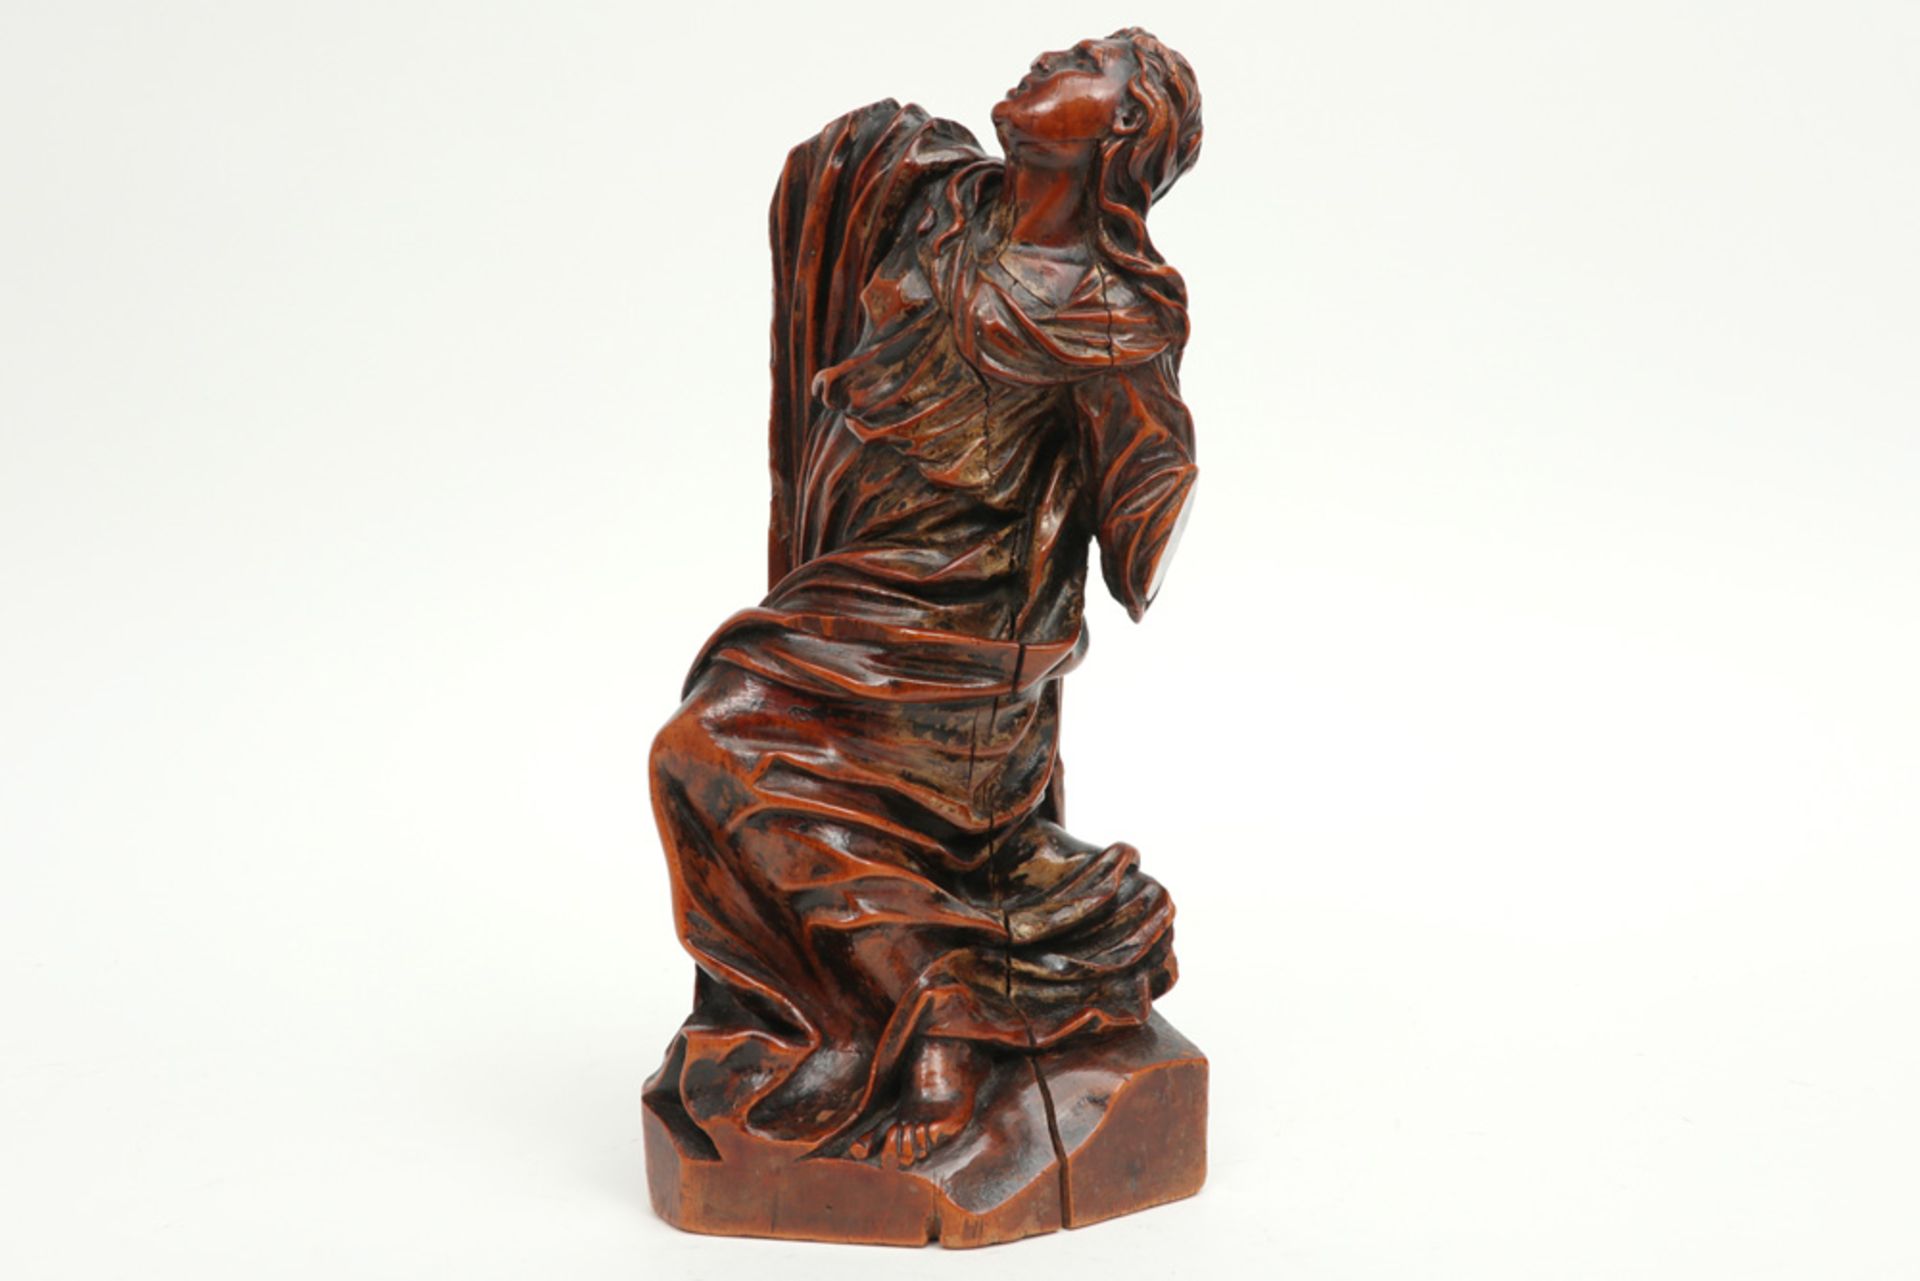 antique "Maria Magdalen" sculpture in wood (part of a Calvary scene)